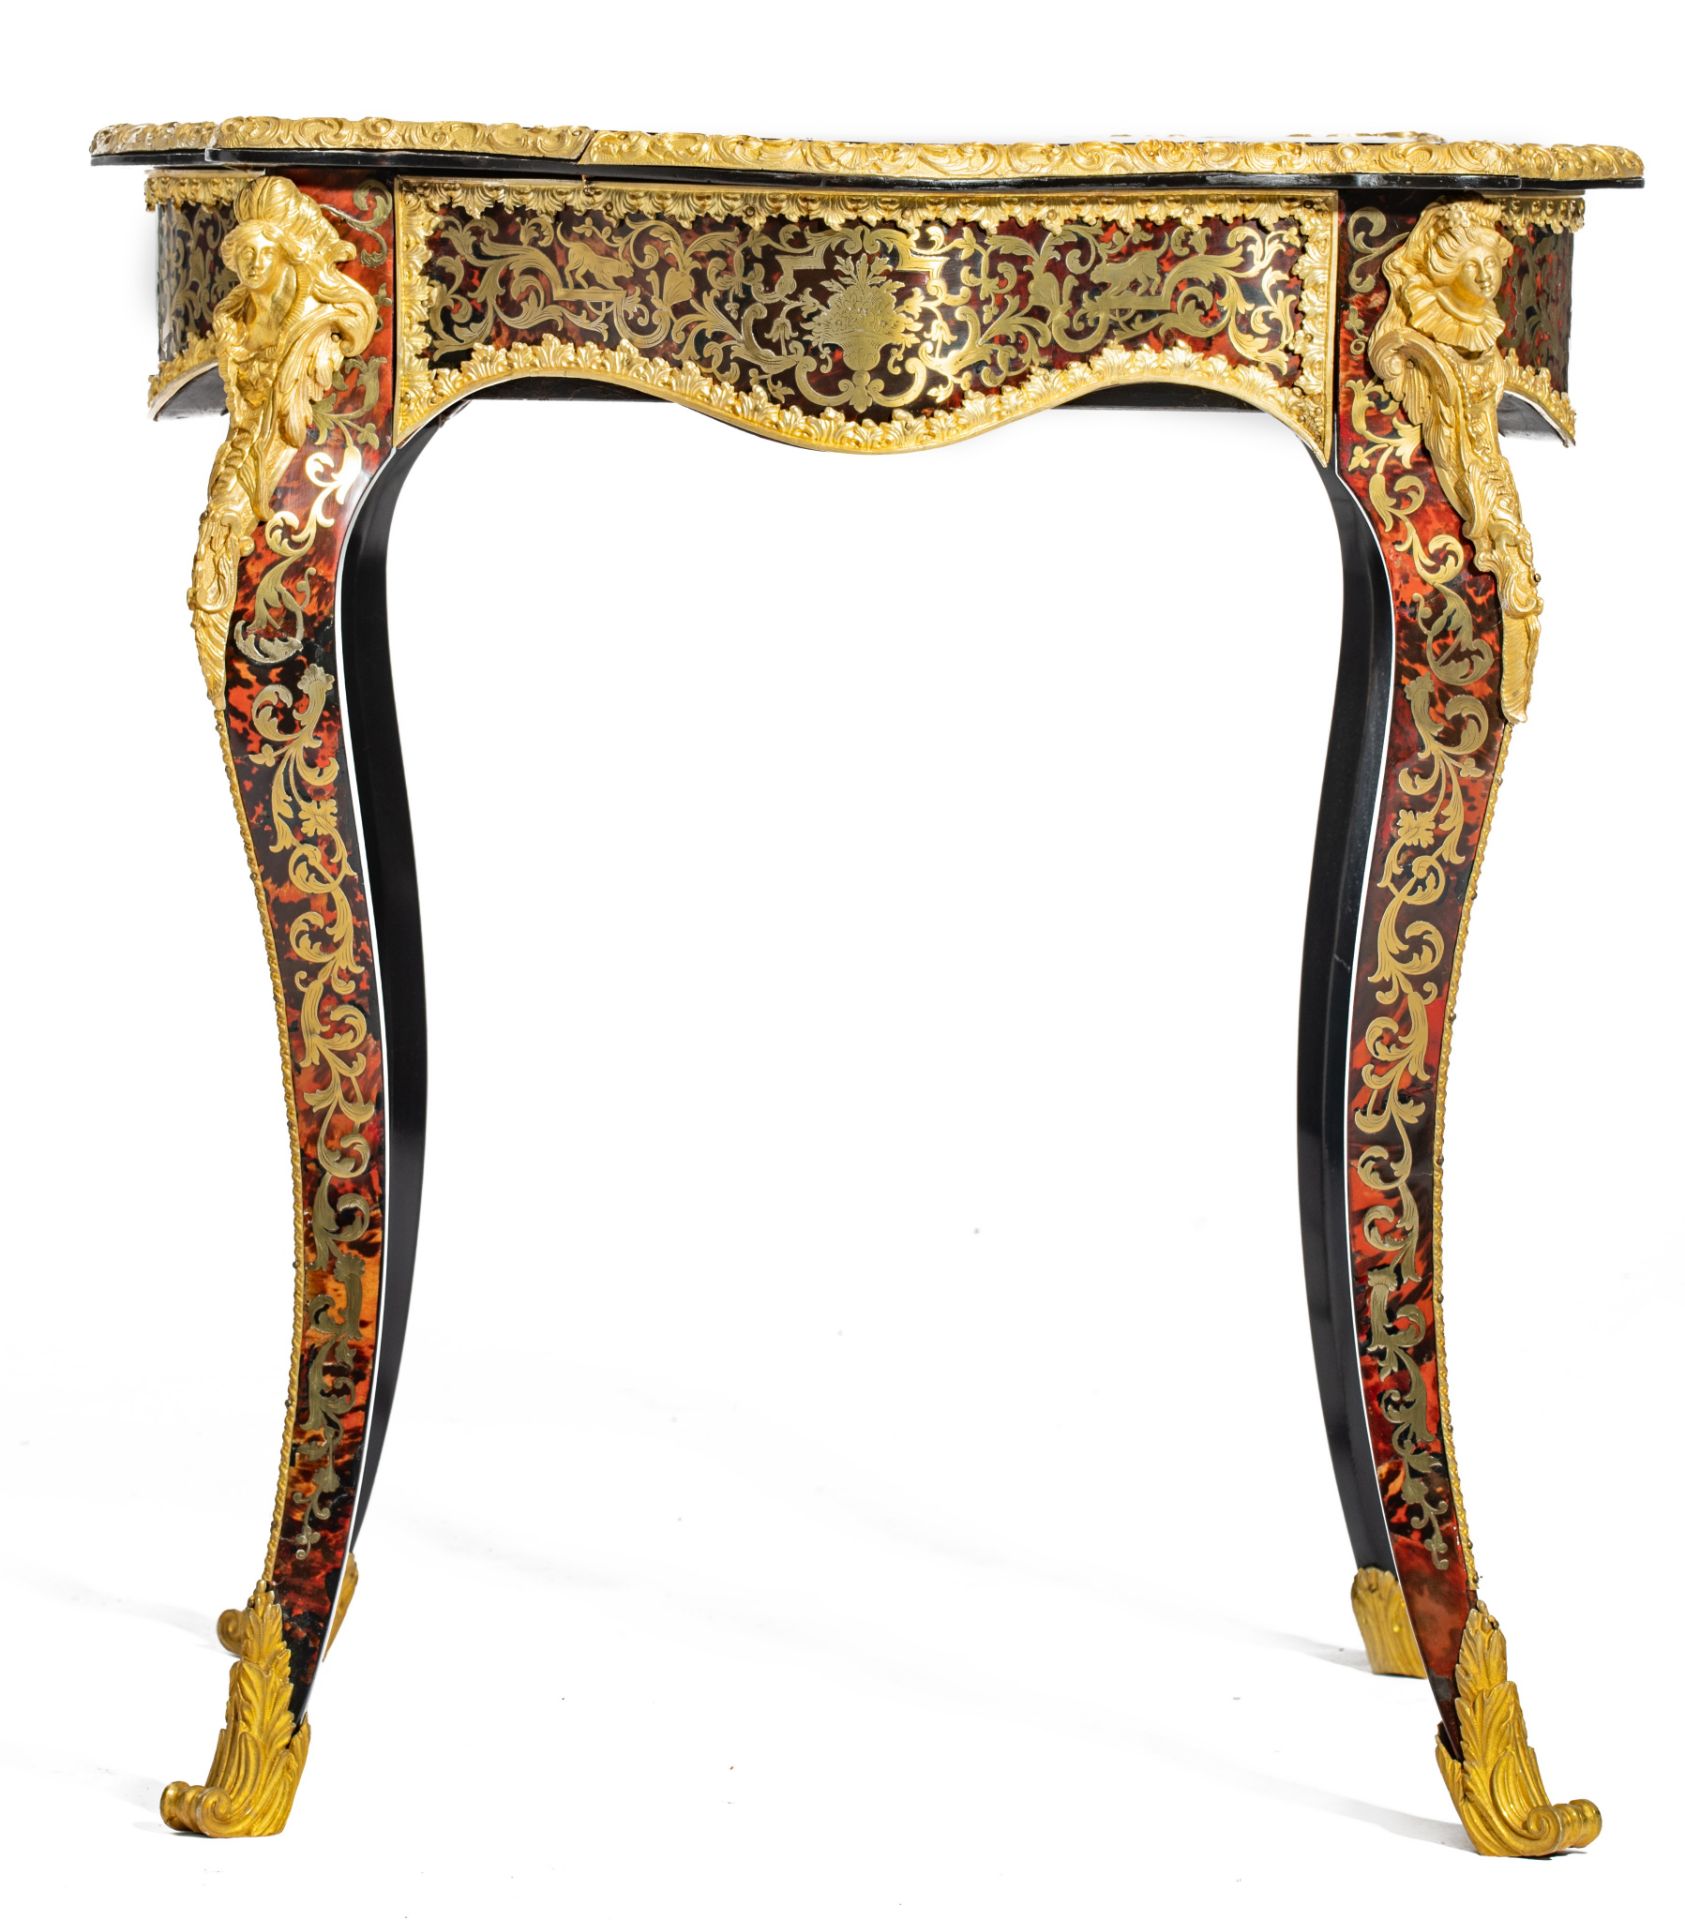 A fine Napoleon III Boulle work games table, with gilt bronze mounts and a red leather inlaid playin - Image 4 of 11